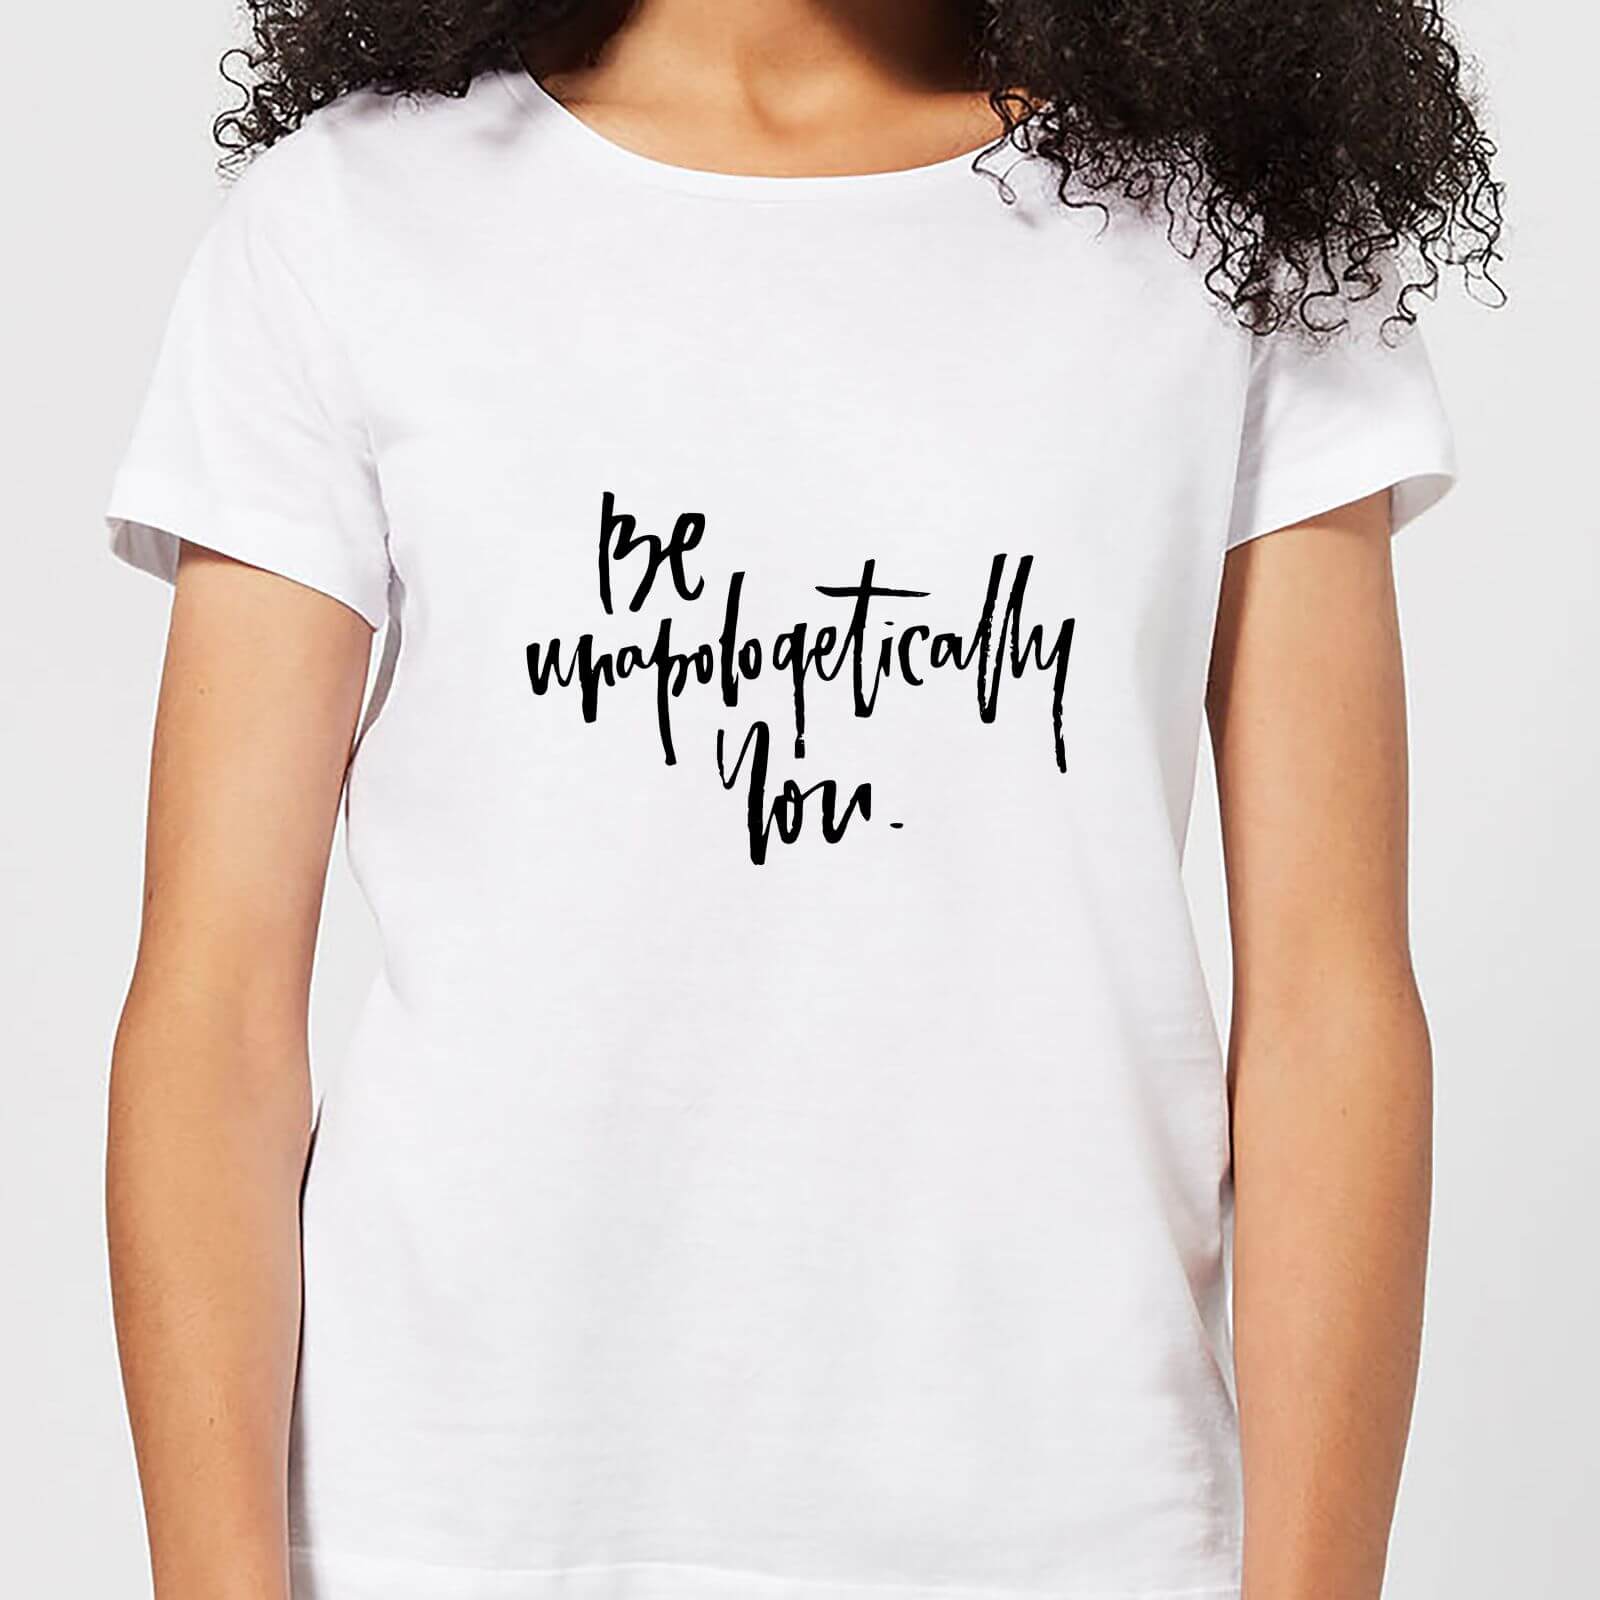 Be Unapologetically You Women's T-Shirt - White - XXL - White